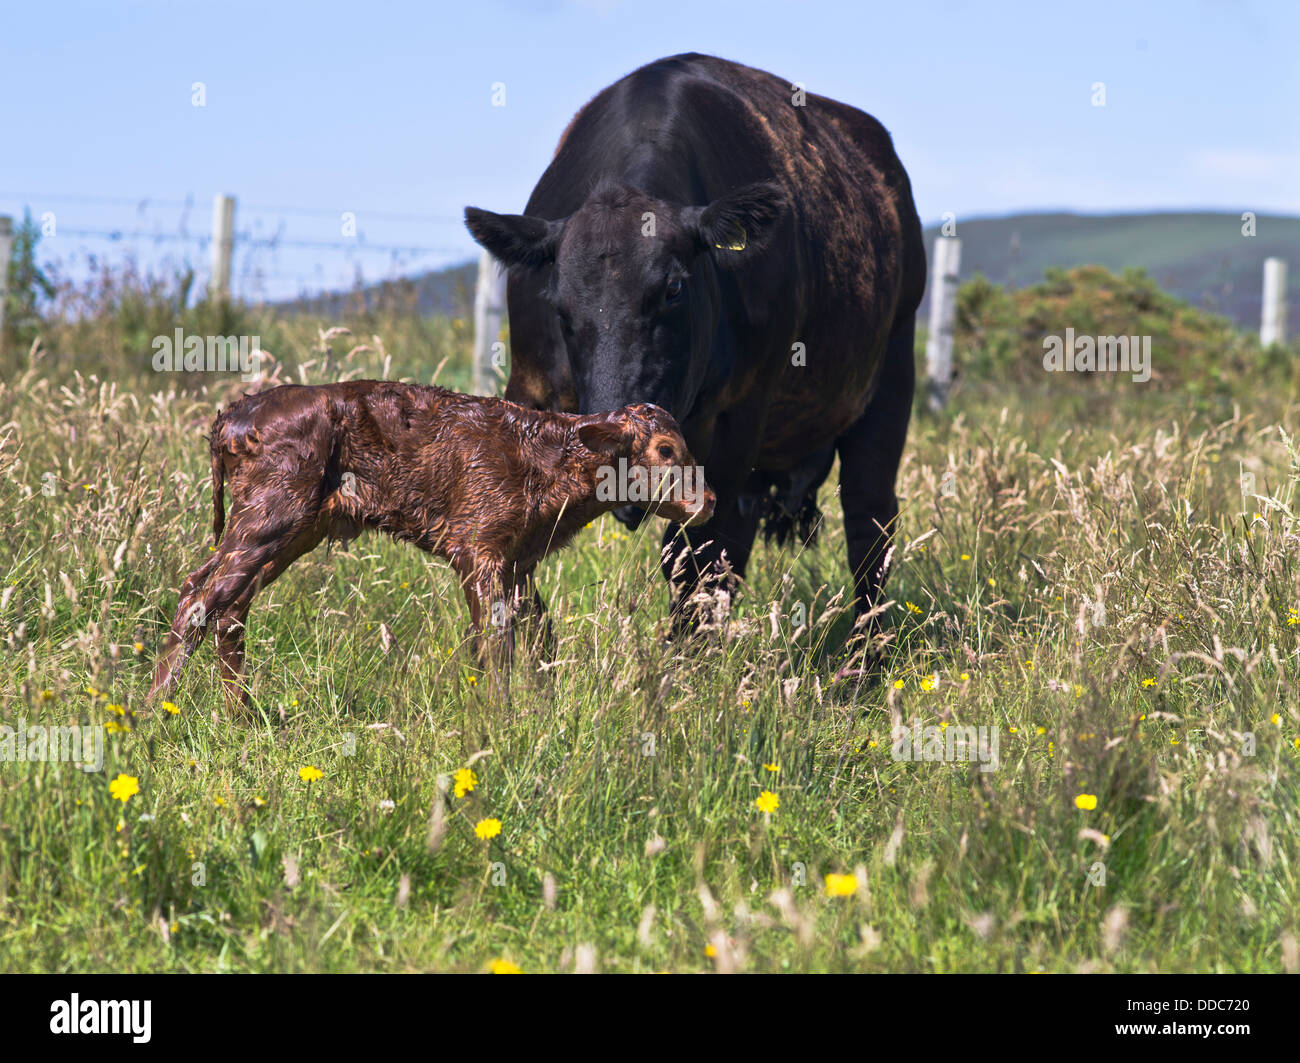 dh  COWS UK FARM ANIMALS Aberdeen Angus crossbreed cow getting newly born calf to stand up newborn standing baby Stock Photo